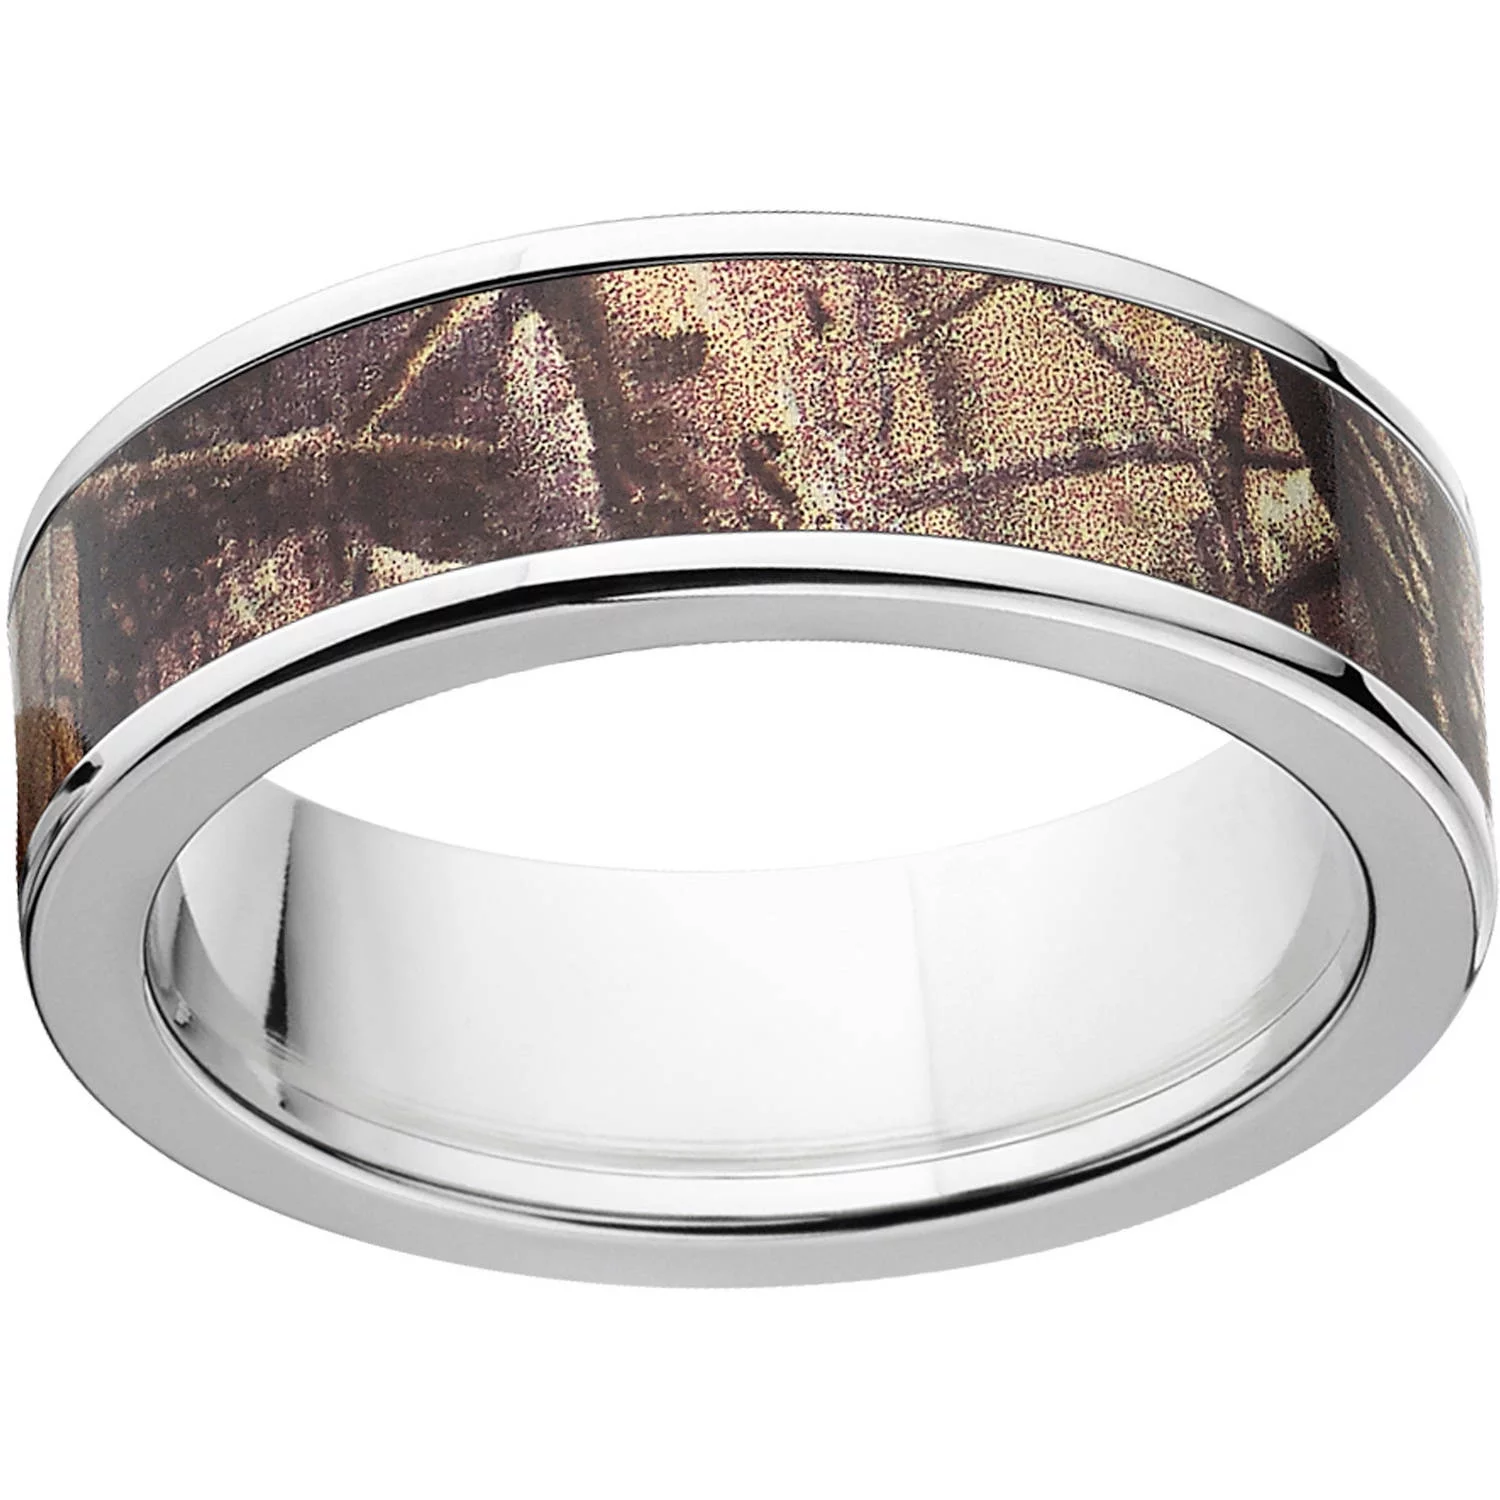 AP Men's Camo 7mm Stainless Steel Wedding Band with Polished Edges and Deluxe Comfort Fit